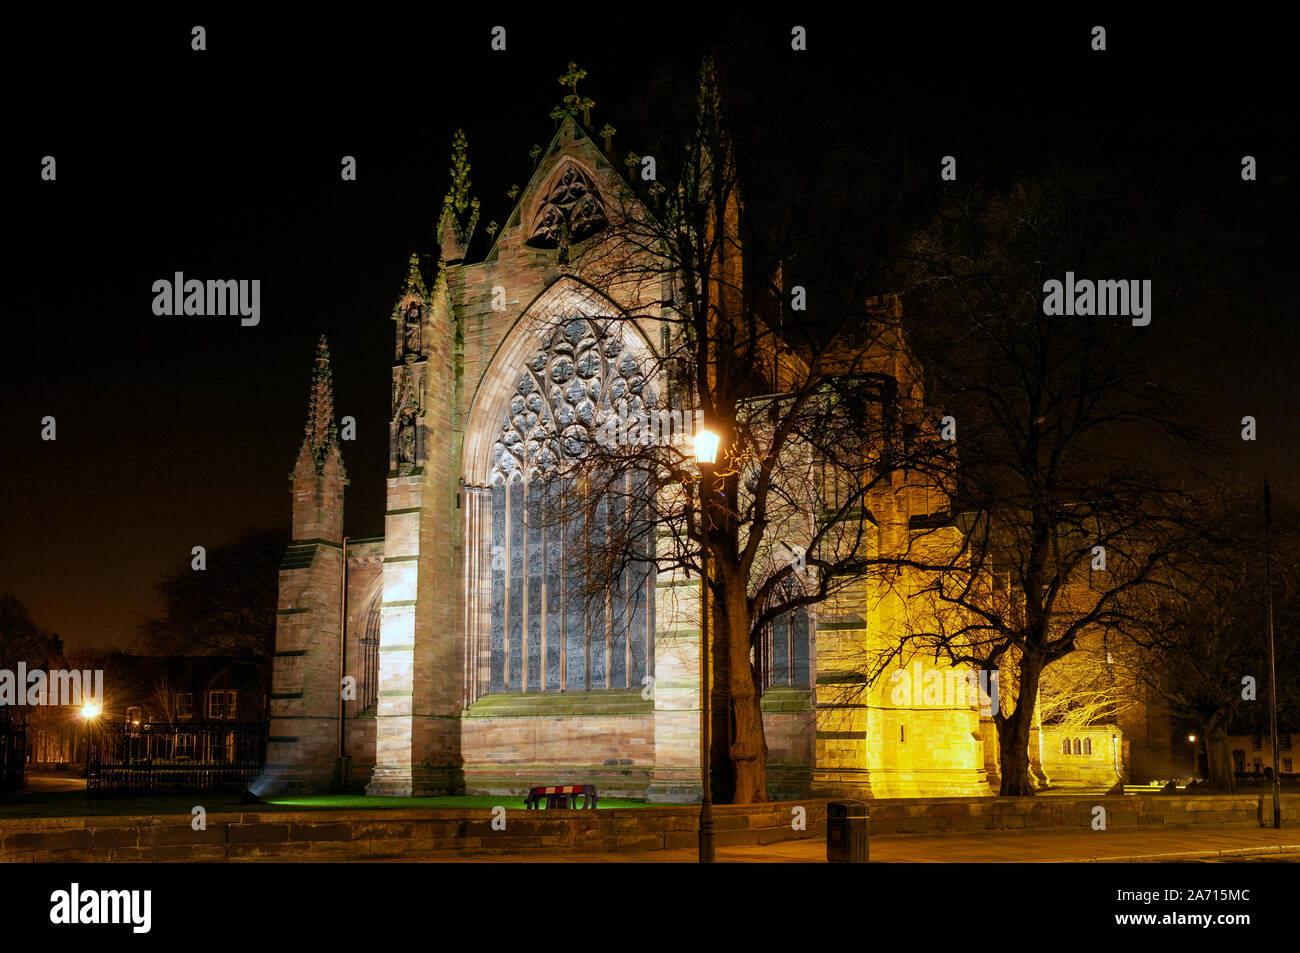 Night photograph of Carlisle Cathedral - The cathedral Church of The Holy & Undivided Trinity - Carlisle, Cumbria, England, UK Stock Photo